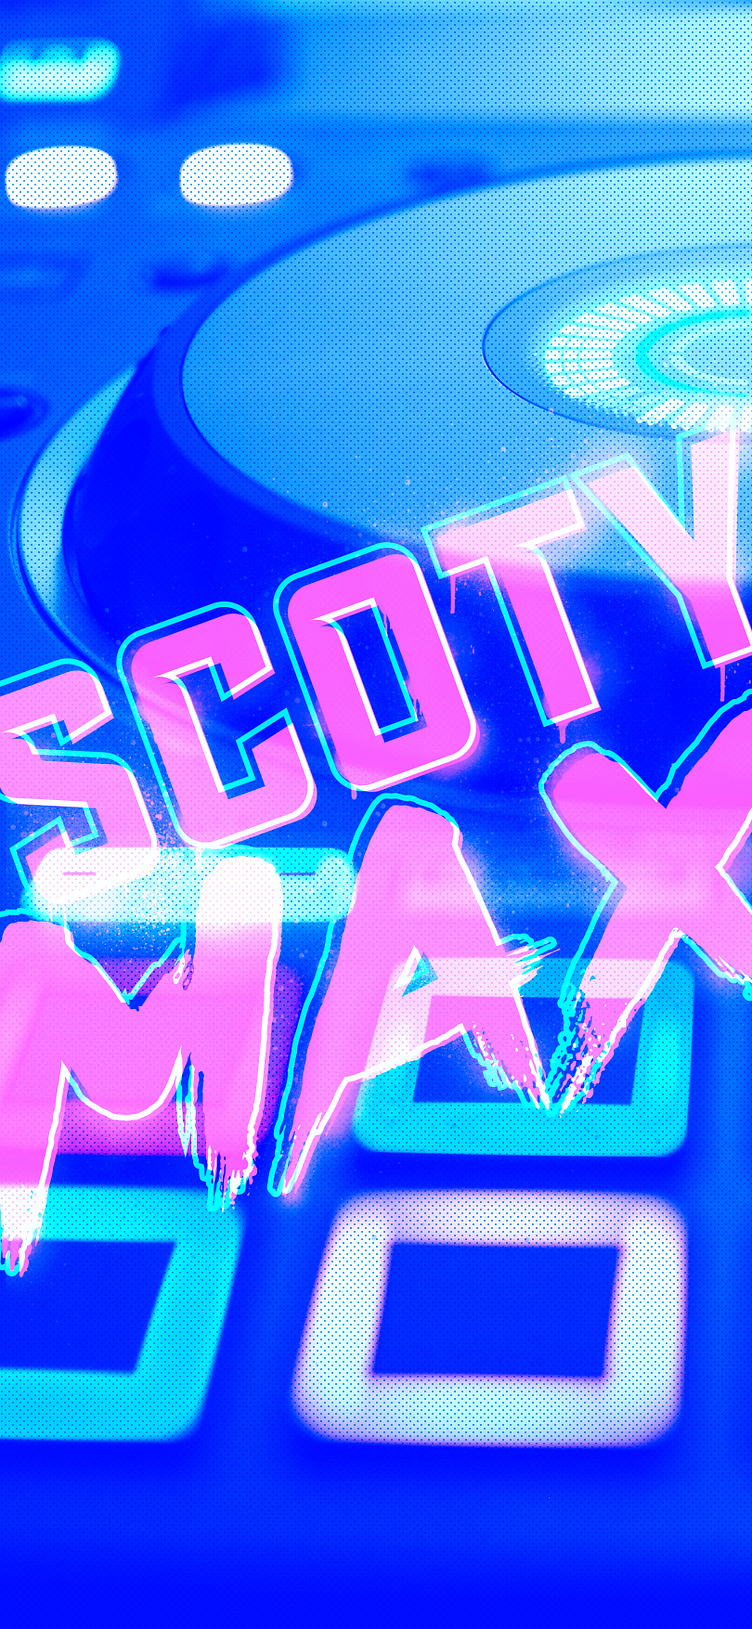 scoty max - mixed font - overlayed on XDJ controller